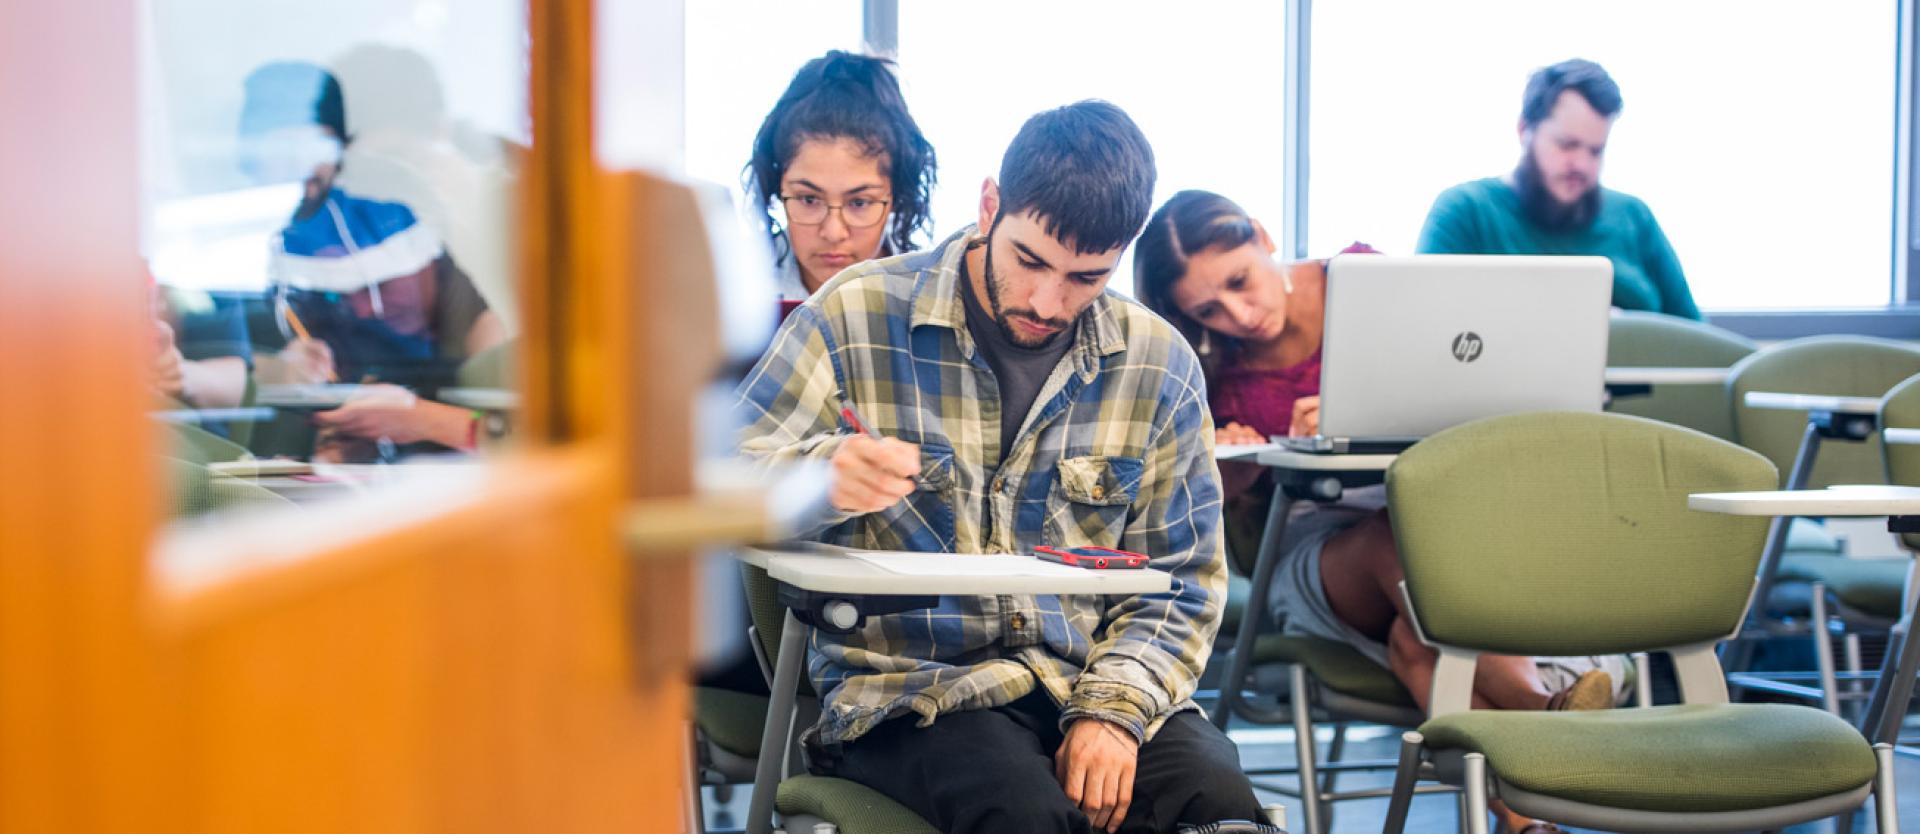 a student at a desk with other student in the background